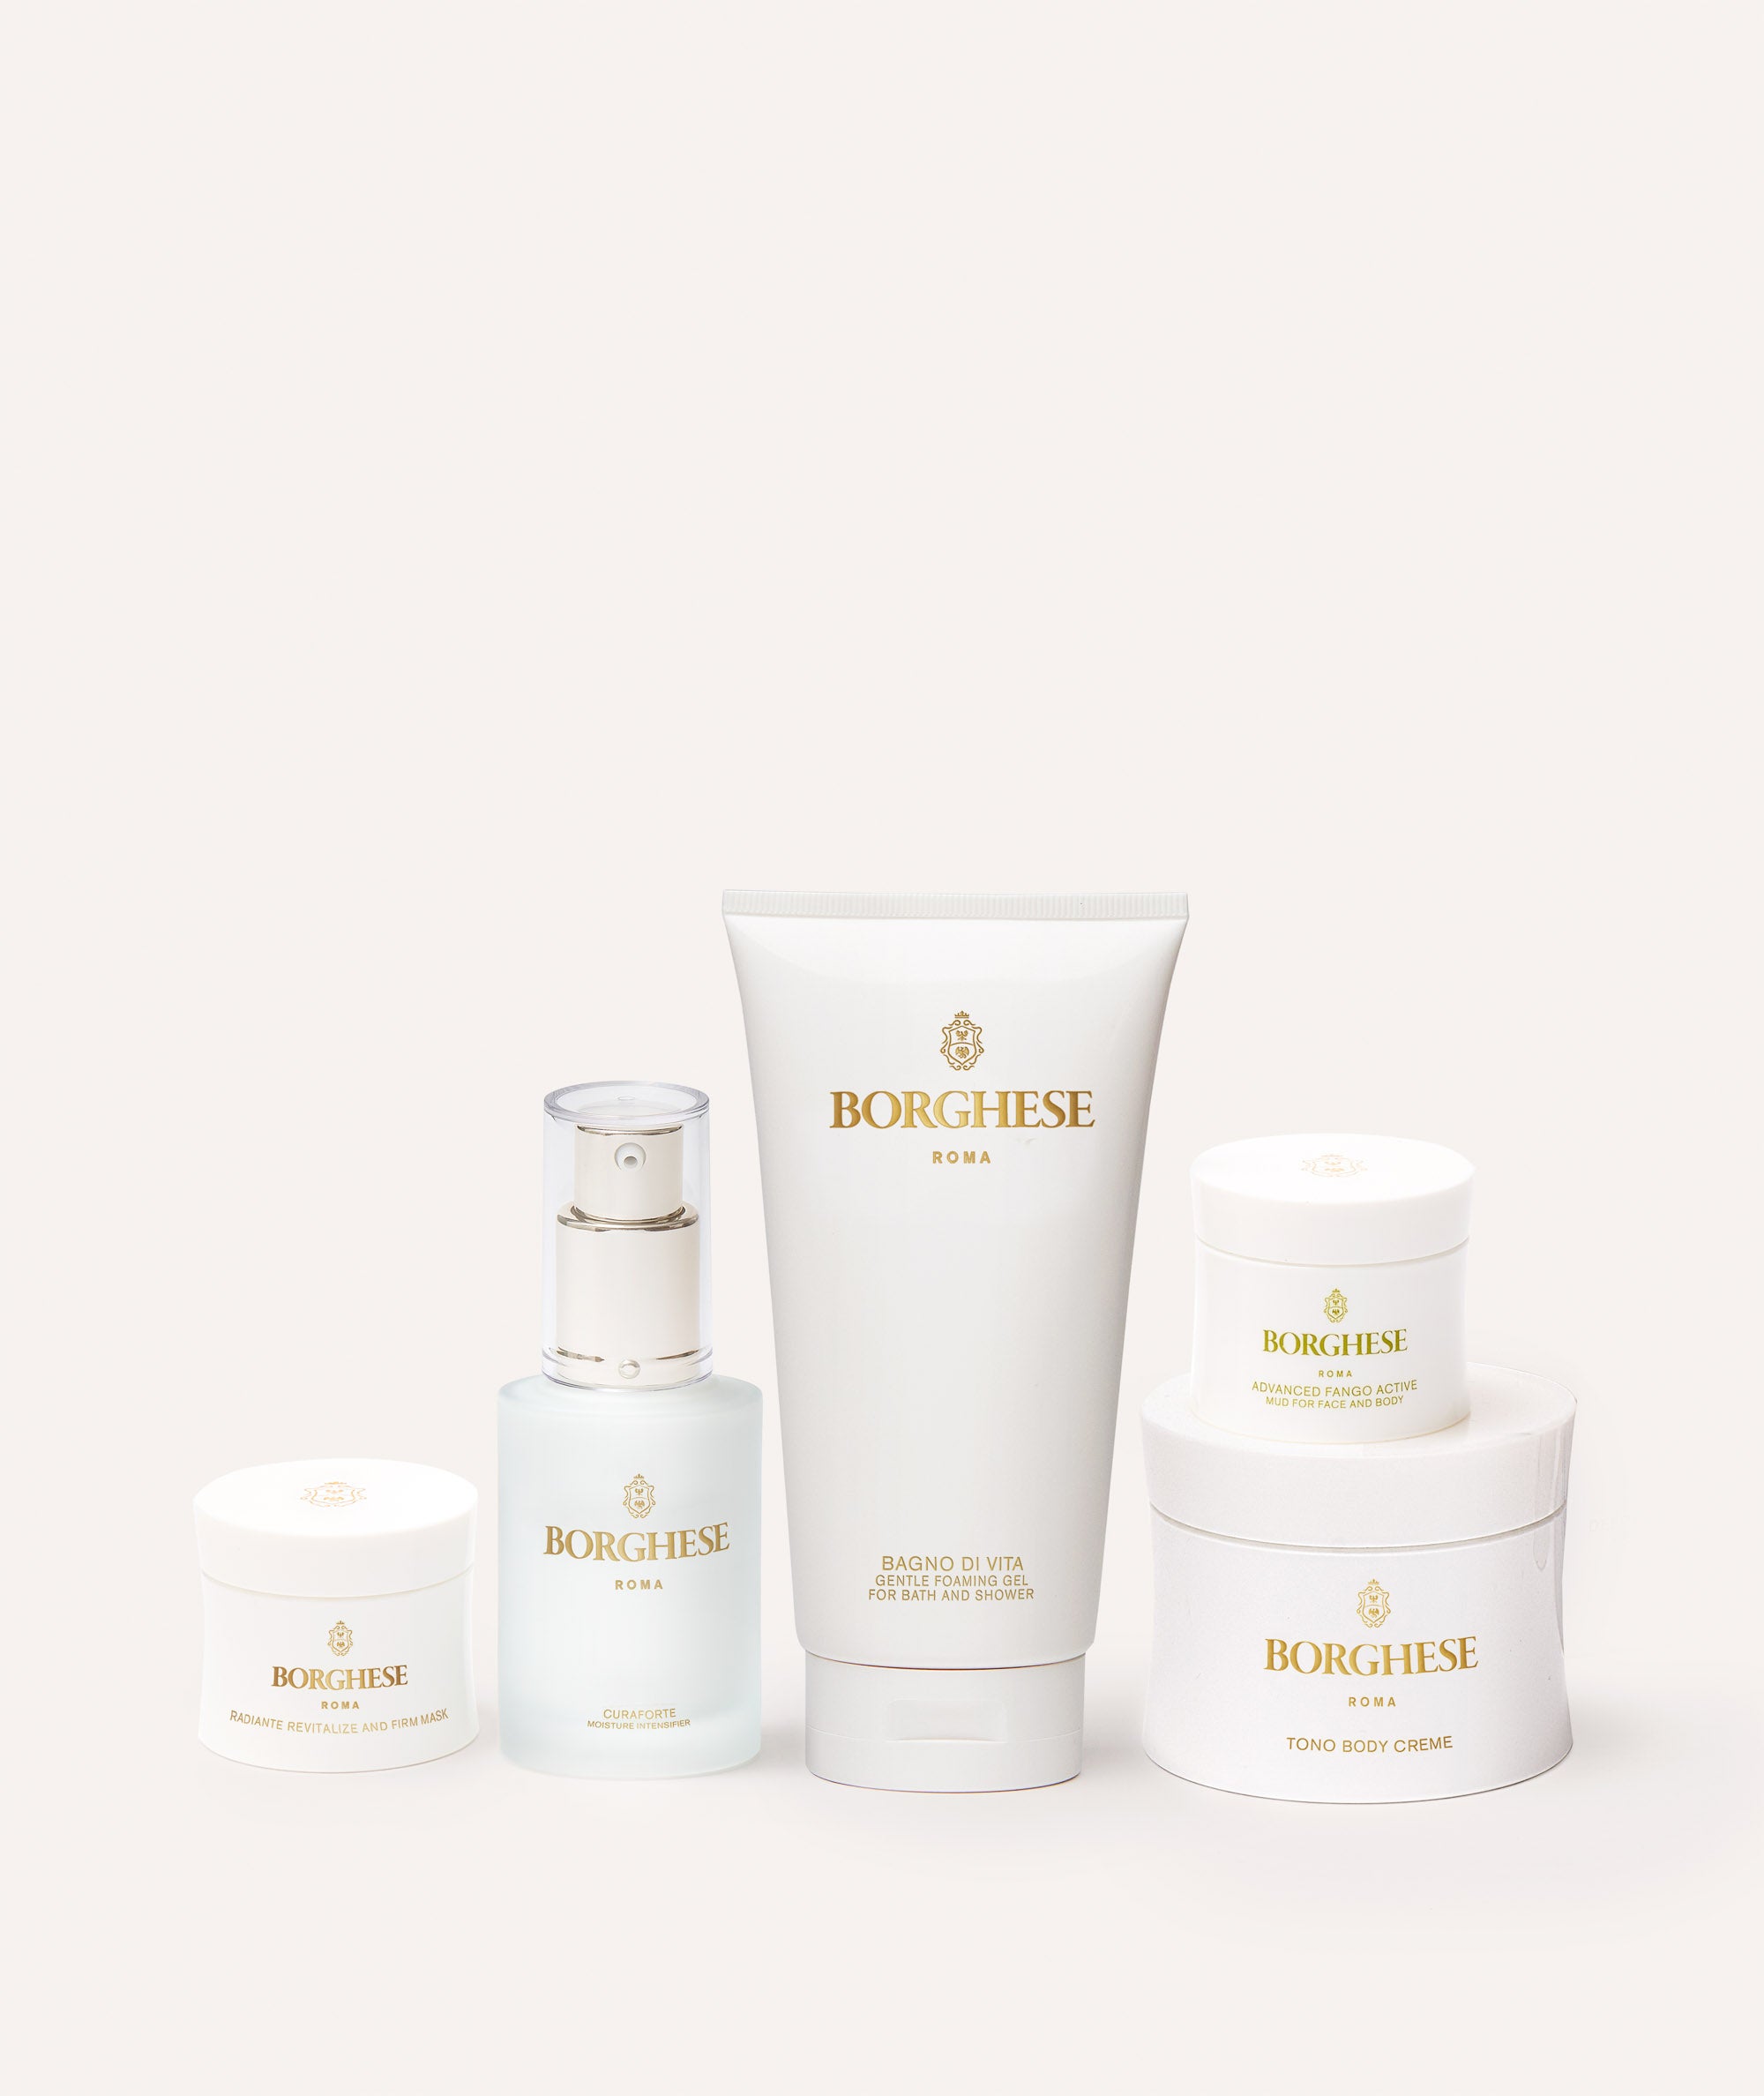 The Borghese 5-Piece Bestsellers Gift Set contents